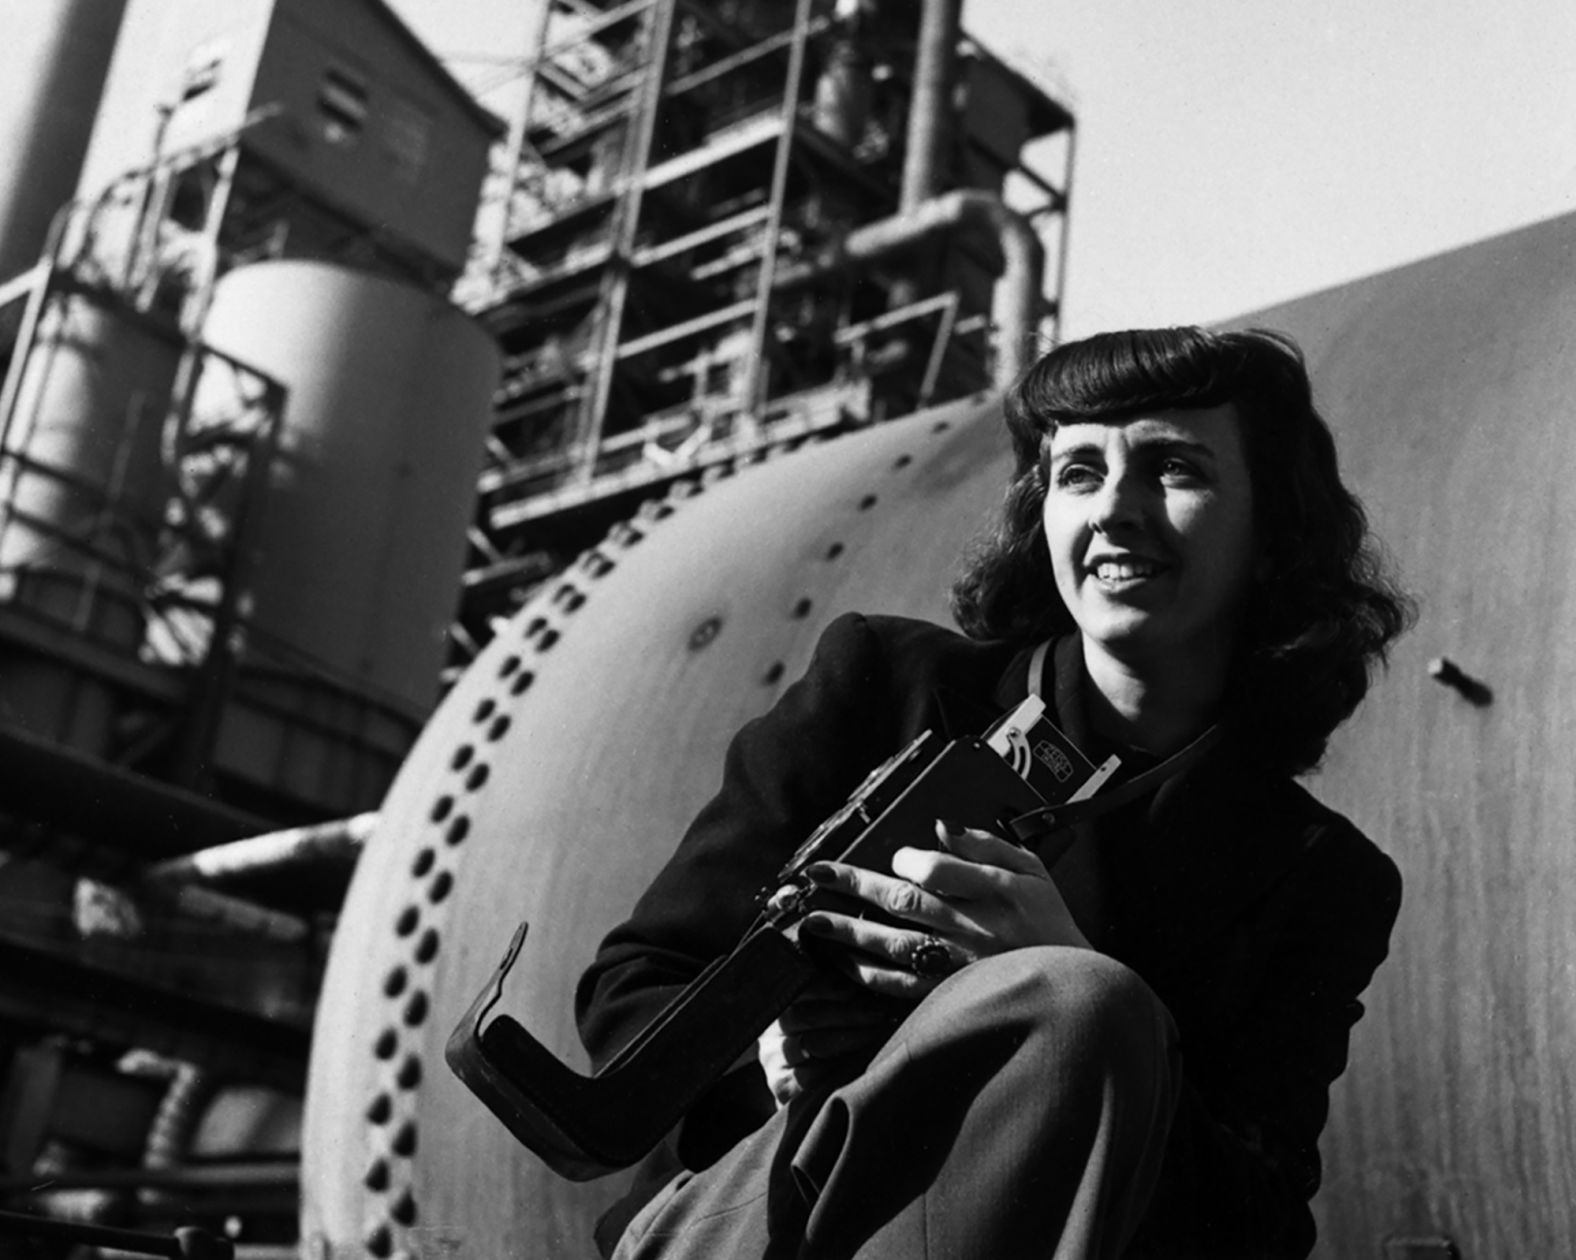 <a href="index.php?page=&url=https%3A%2F%2Fwww.estherbubley.com%2Fbio_frame_set.htm" target="_blank" target="_blank">Esther Bubley</a>, seen here in 1944, started her career by documenting American life at home during World War II. She then traveled the world during the "golden age" of photojournalism, photographing stories for prominent magazines such as Life and Ladies' Home Journal. "Bubley approached her assignments with genuine curiosity, creating probing and enduring portrayals of ordinary lives," according to the <a href="index.php?page=&url=https%3A%2F%2Fnmwa.org%2Fexplore%2Fartist-profiles%2Festher-bubley" target="_blank" target="_blank">National Museum of Women in the Arts</a>.